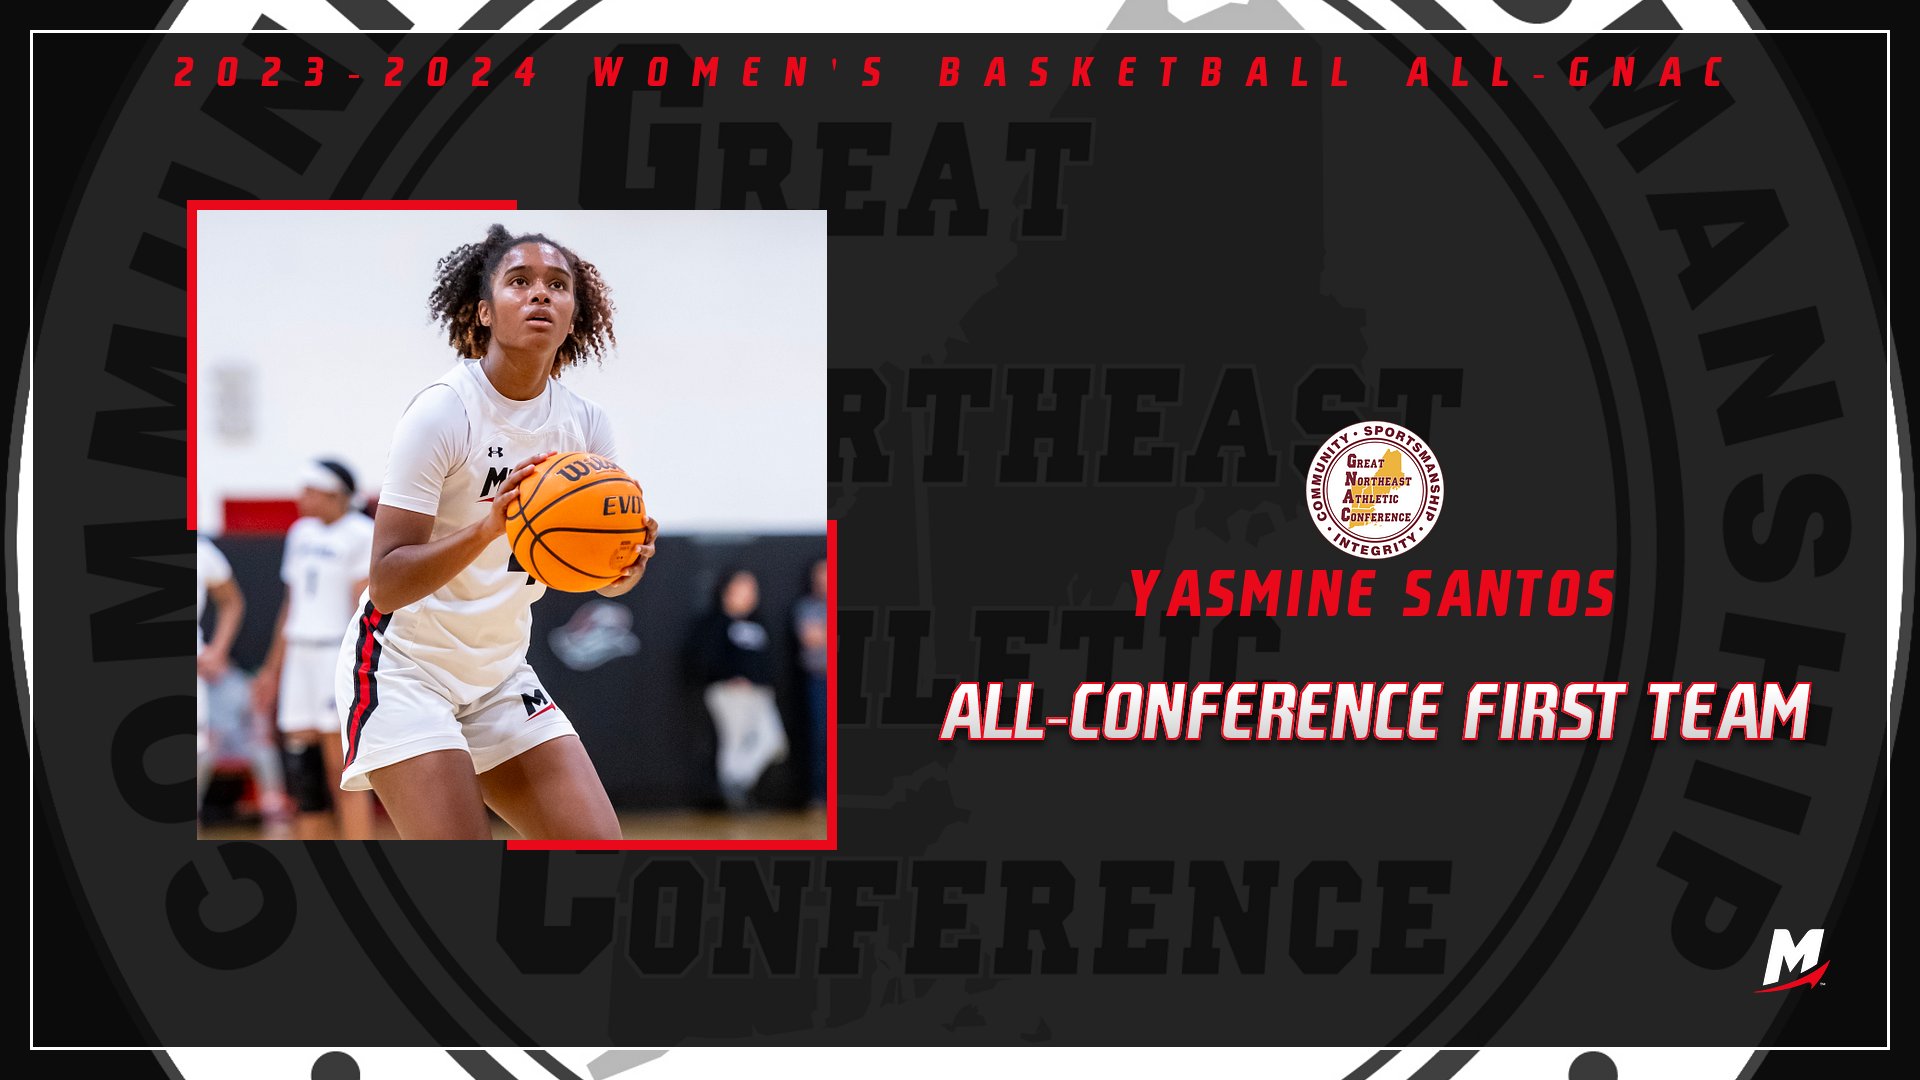 Santos Named to GNAC All-Conference First Team for Women’s Basketball